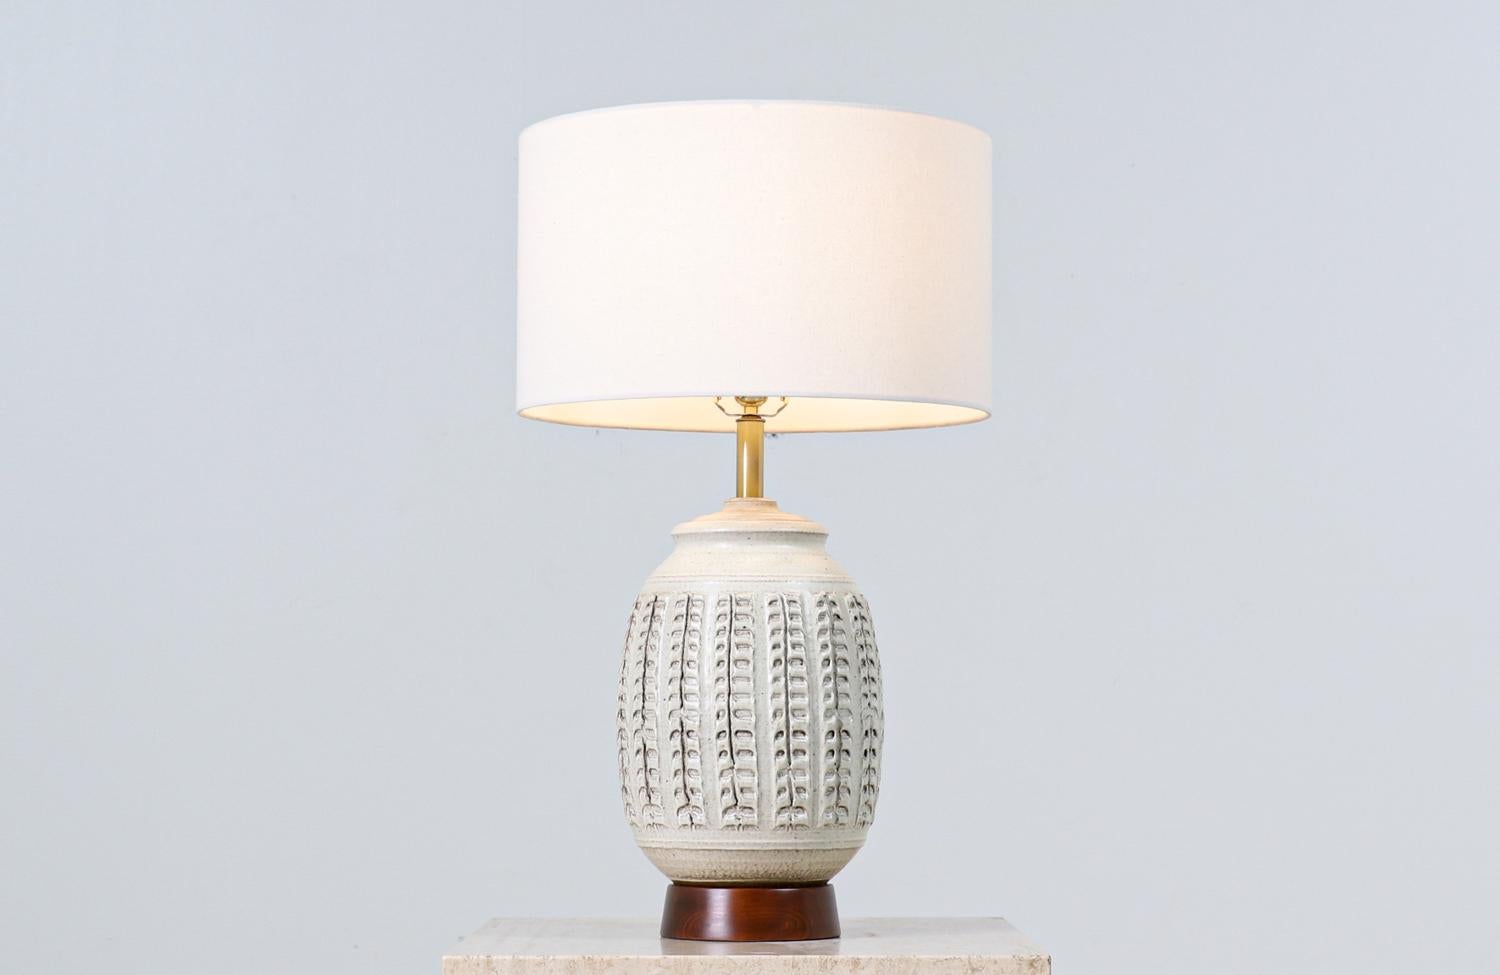 California Modern Glazed Ceramic Table Lamp by Bob Kinzie

Dimensions
29in H x 9in W x 9in D
Lamp Shade: 10in H x 17in W

Ceramic table lamp designed by Bob Kinzie for Affiliated Craftsmen in the United States circa 1960s. This lamp features a